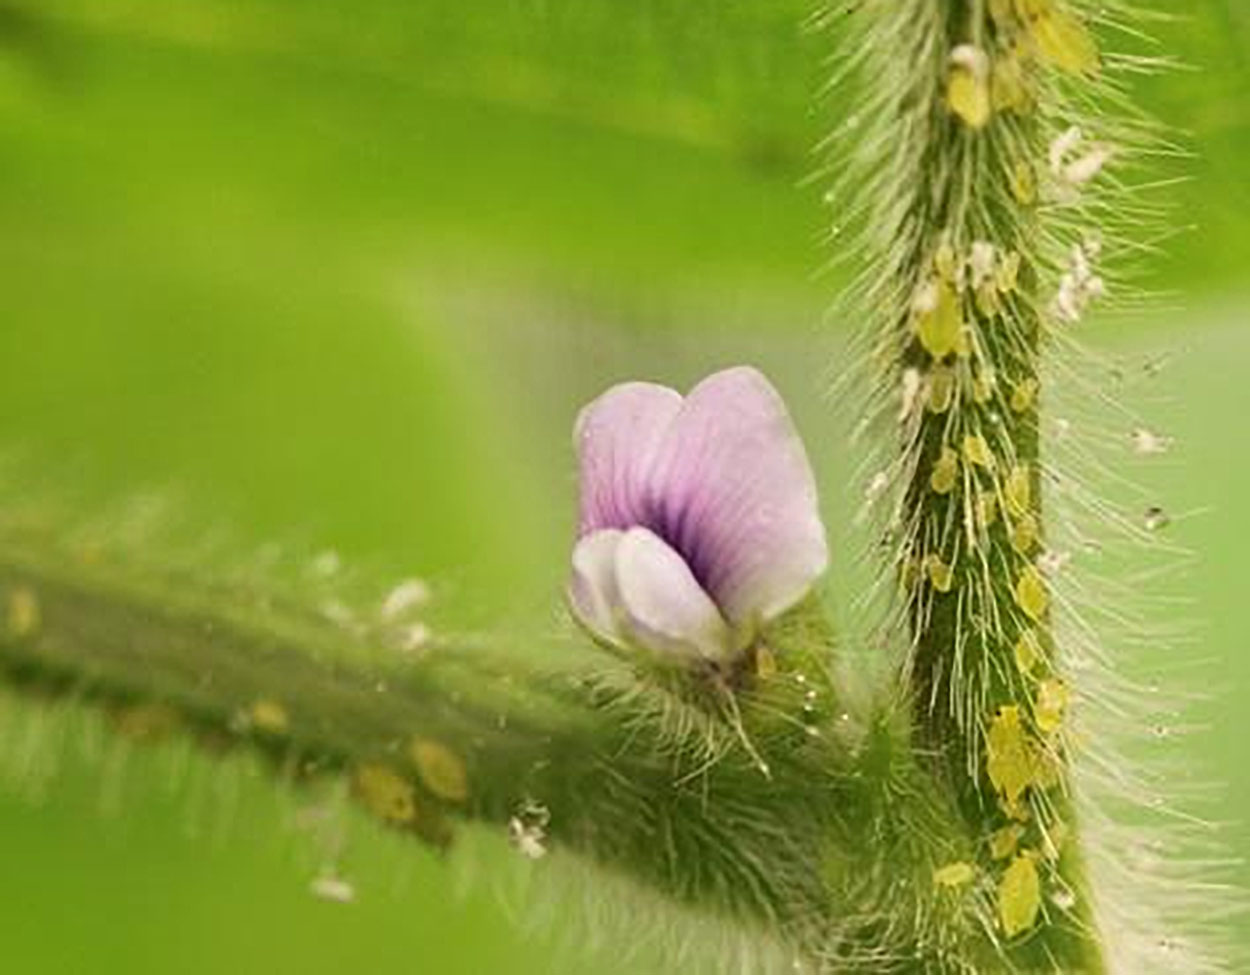 Small, green teardrop shaped insects on a green, hairy stem with pink flower.